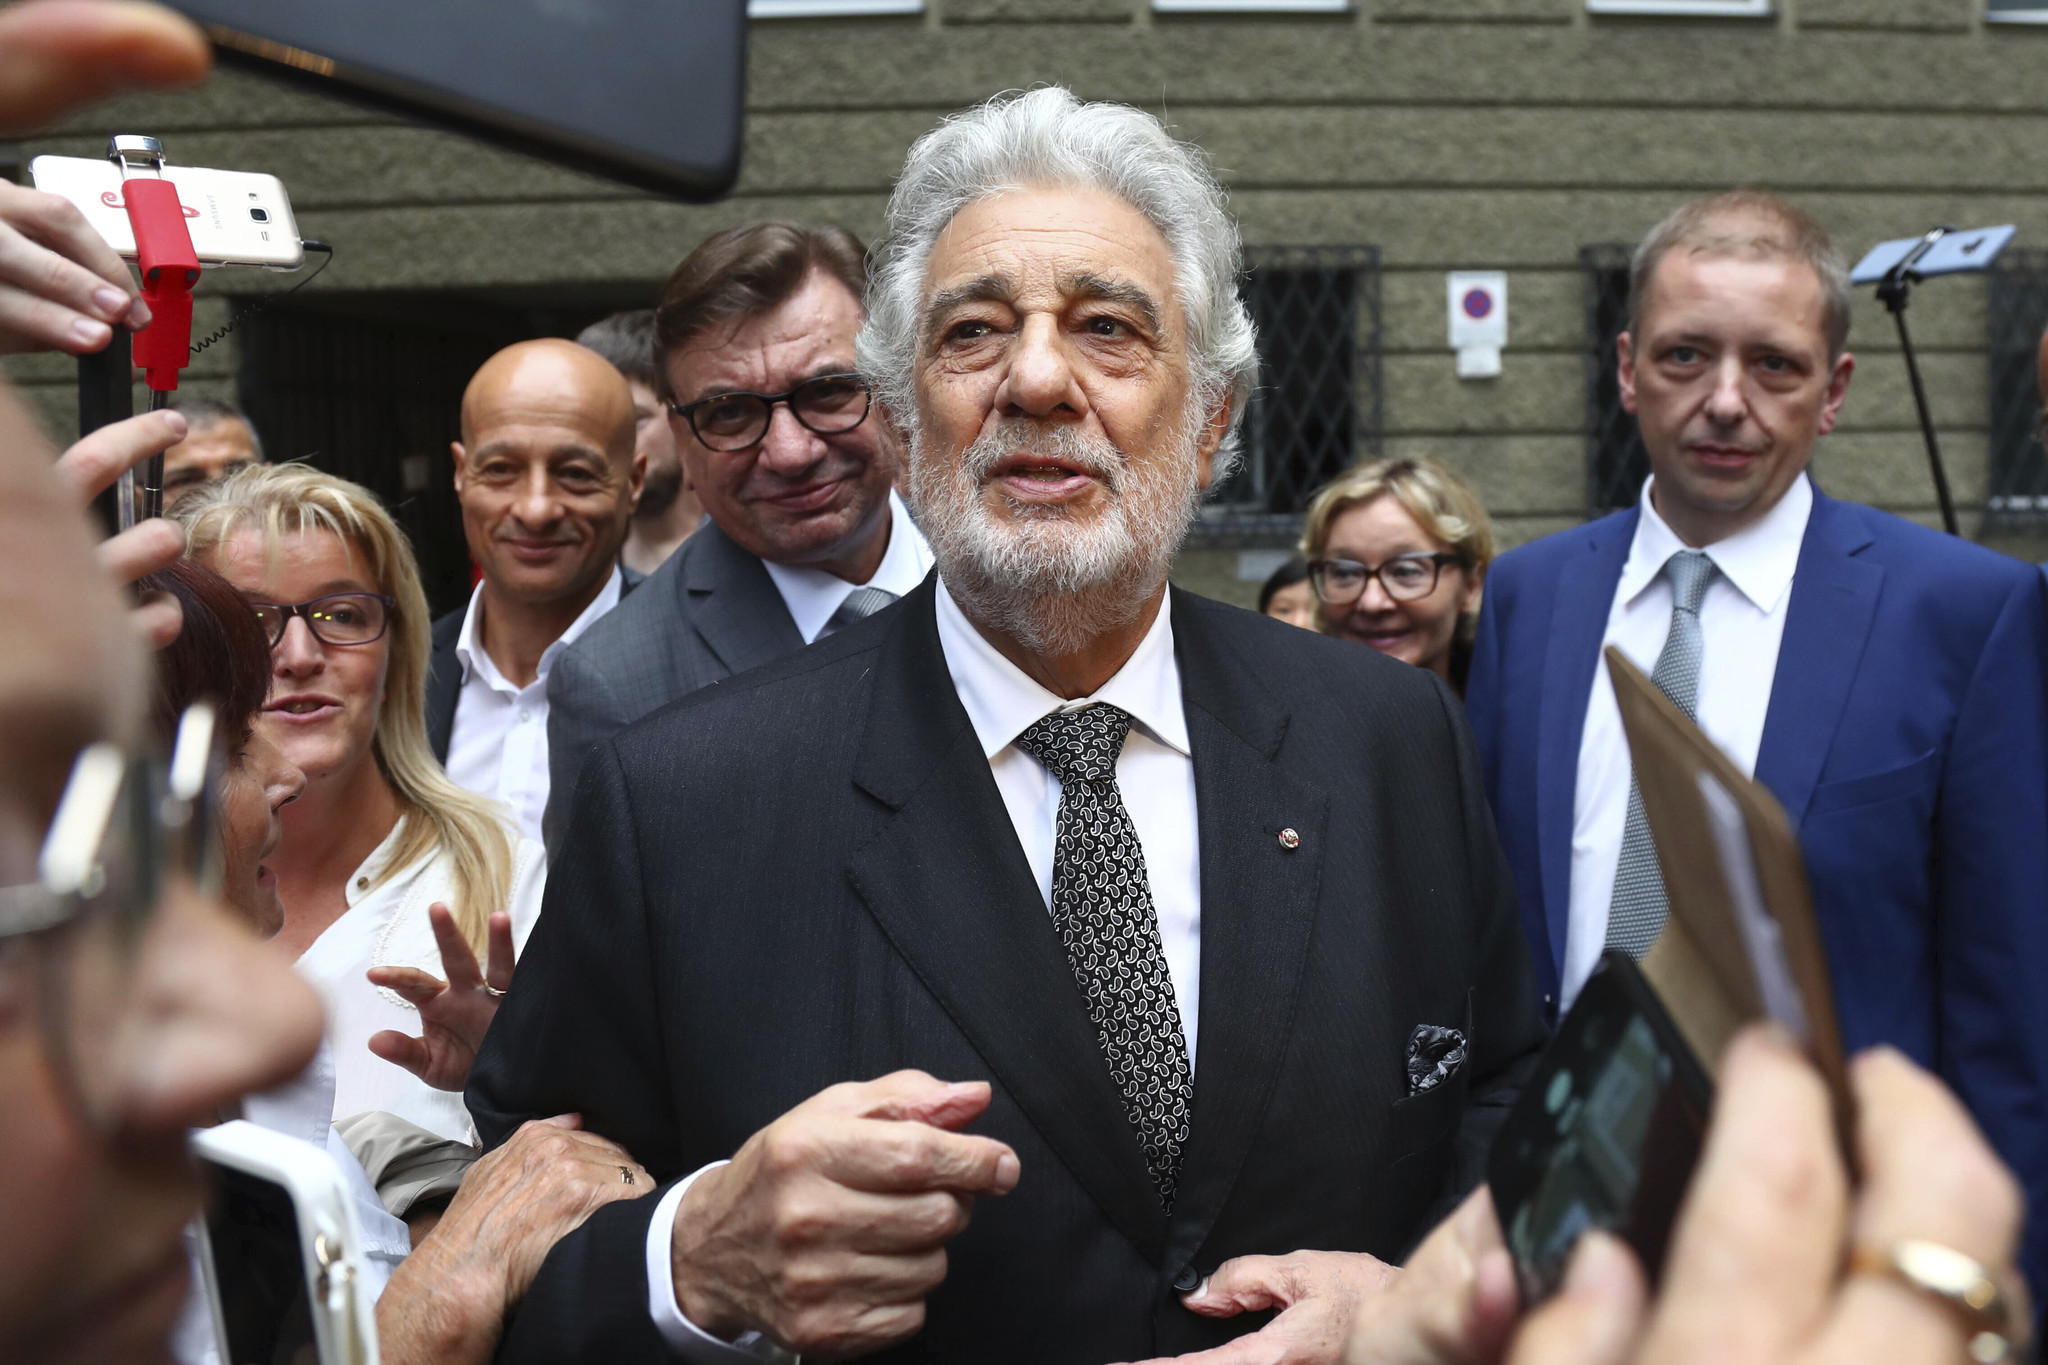 Plácido Domingo making first performance since sexual harassment accusations